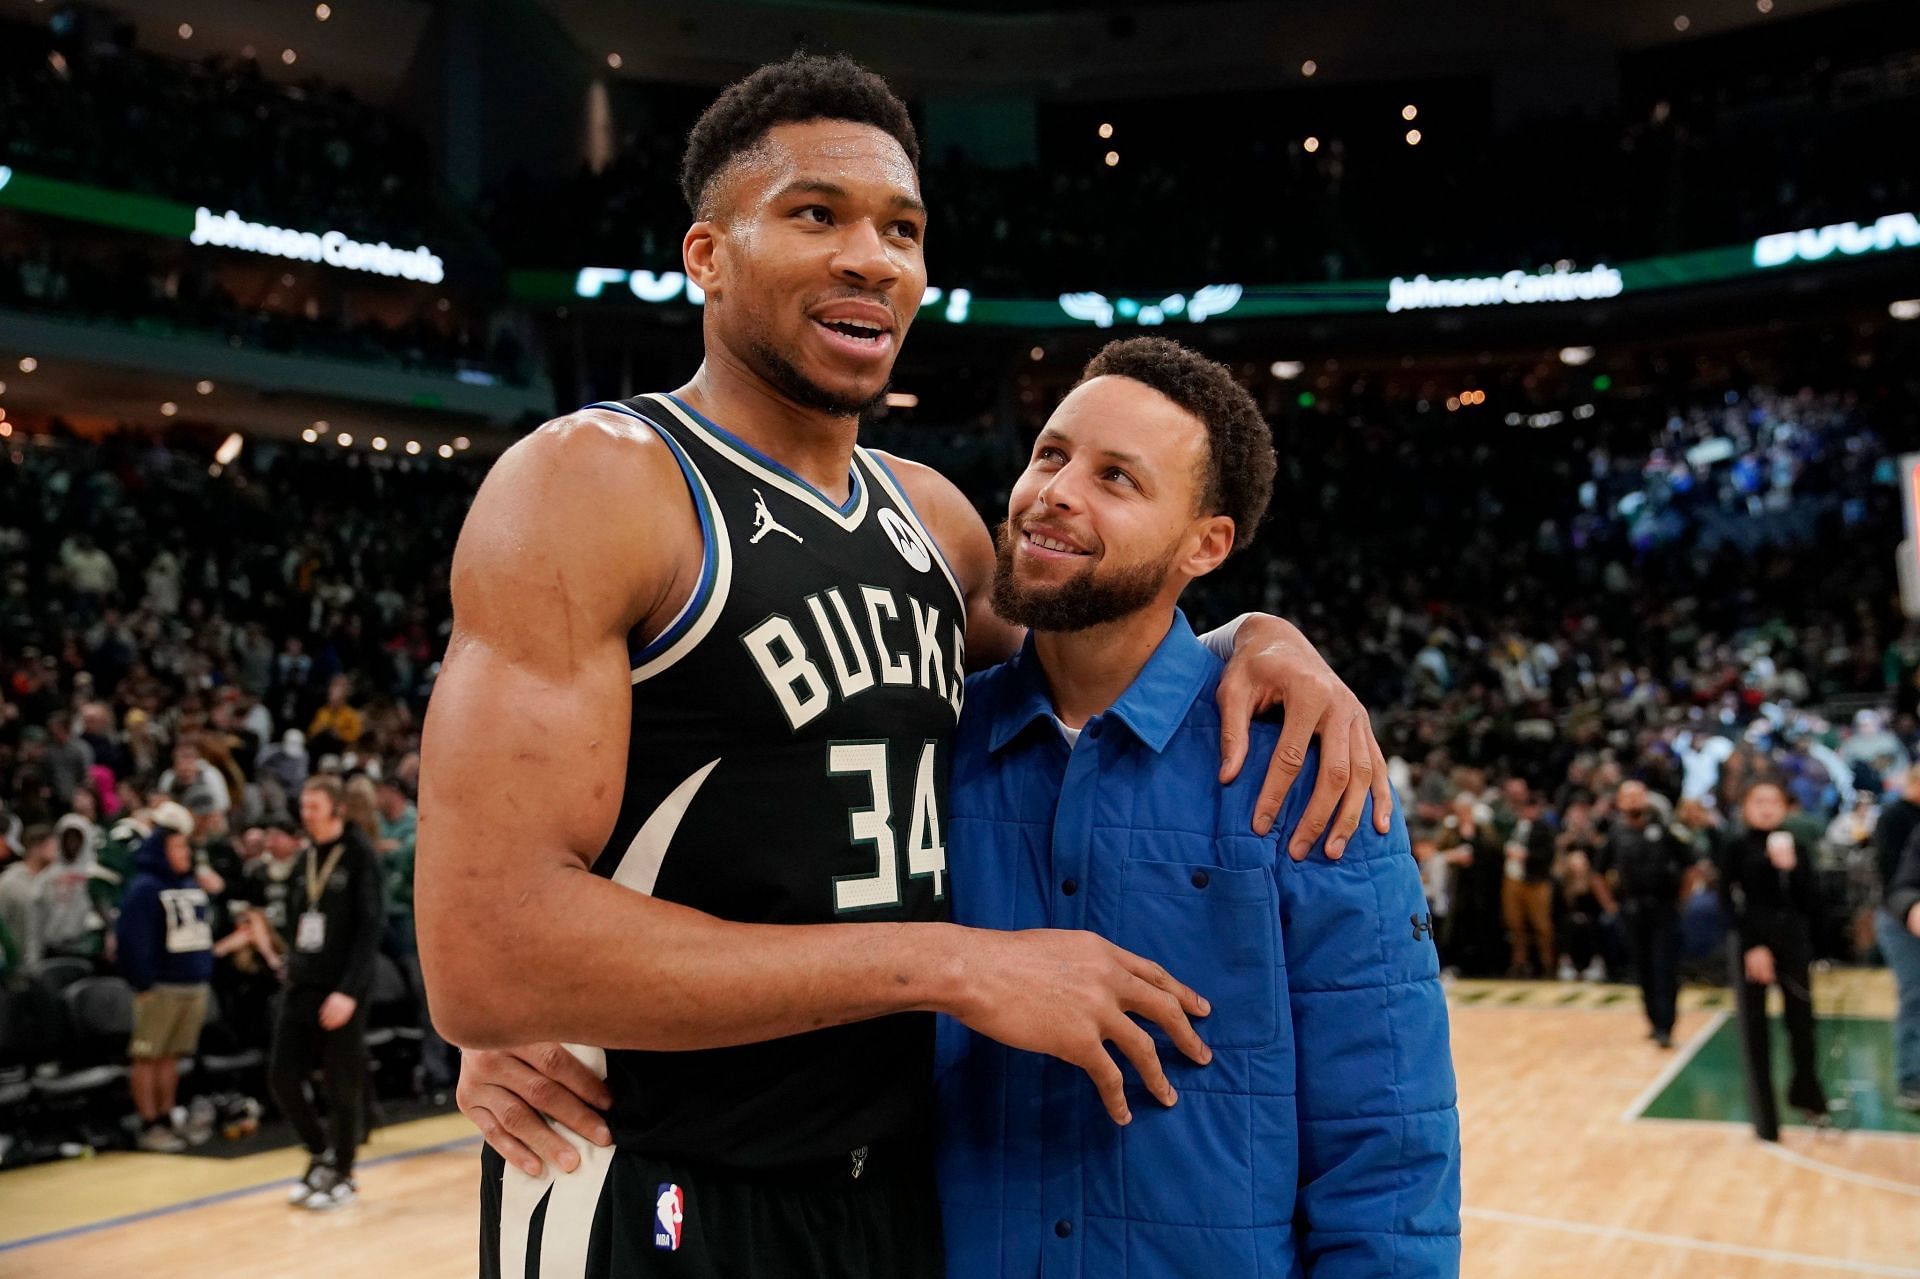 &quot;If only these two would pair up&quot;: Steph Curry-Giannis Antetokounmpo post-game moment fuels fan speculation